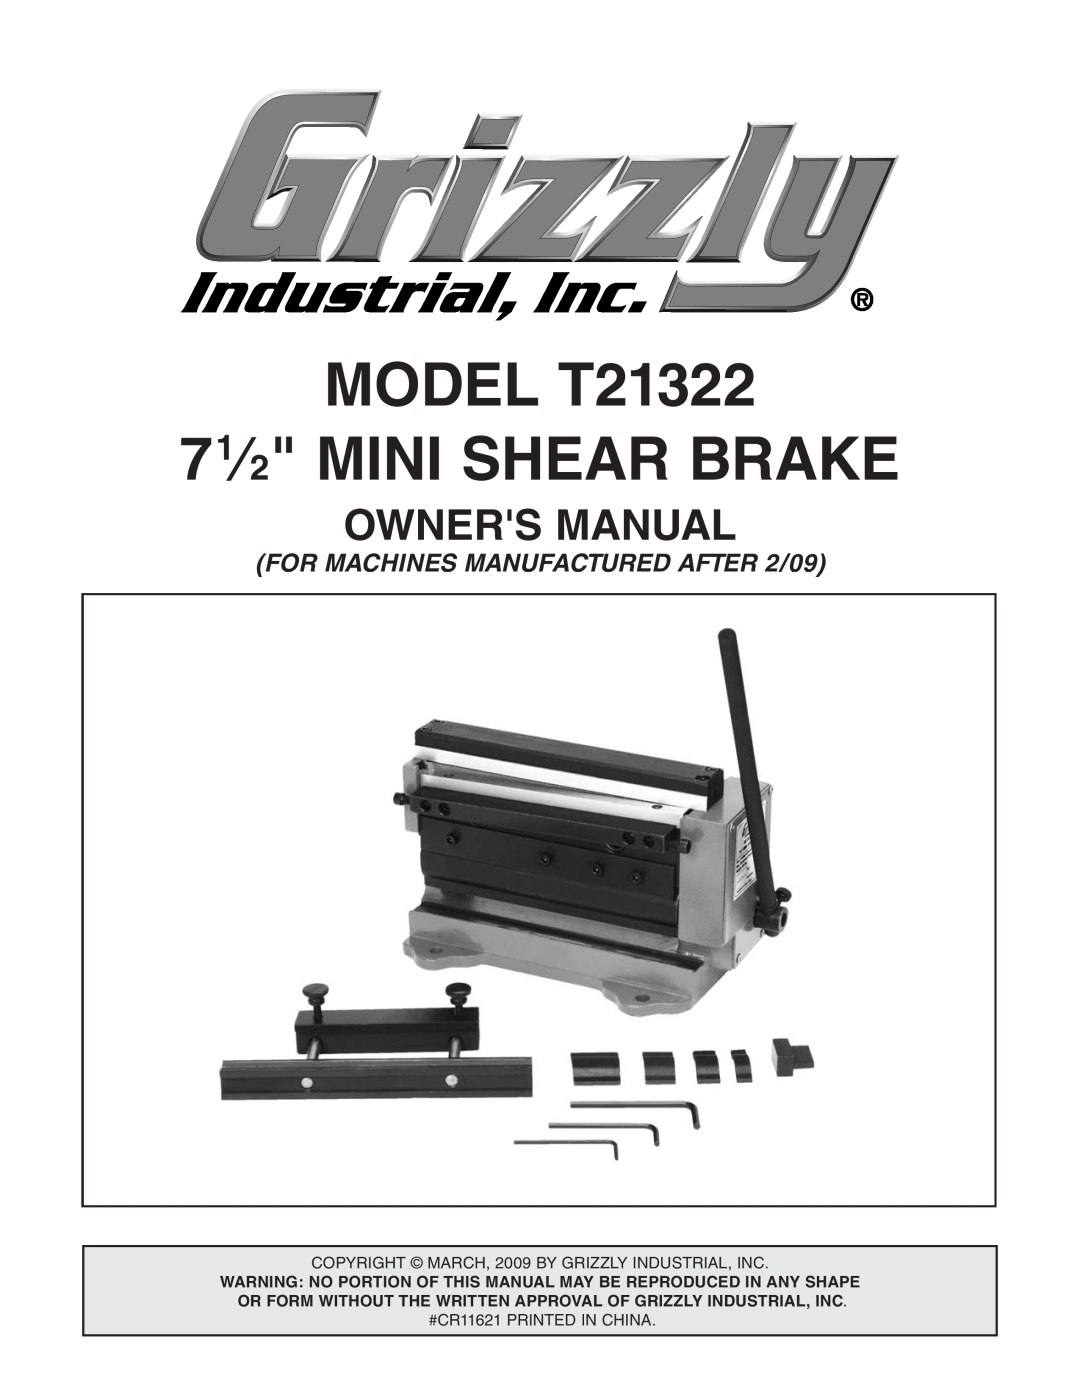 Grizzly owner manual MODEL T21322 71⁄2 MINI SHEAR BRAKE, FOR MACHINES MANUFACTURED AFTER 2/09 